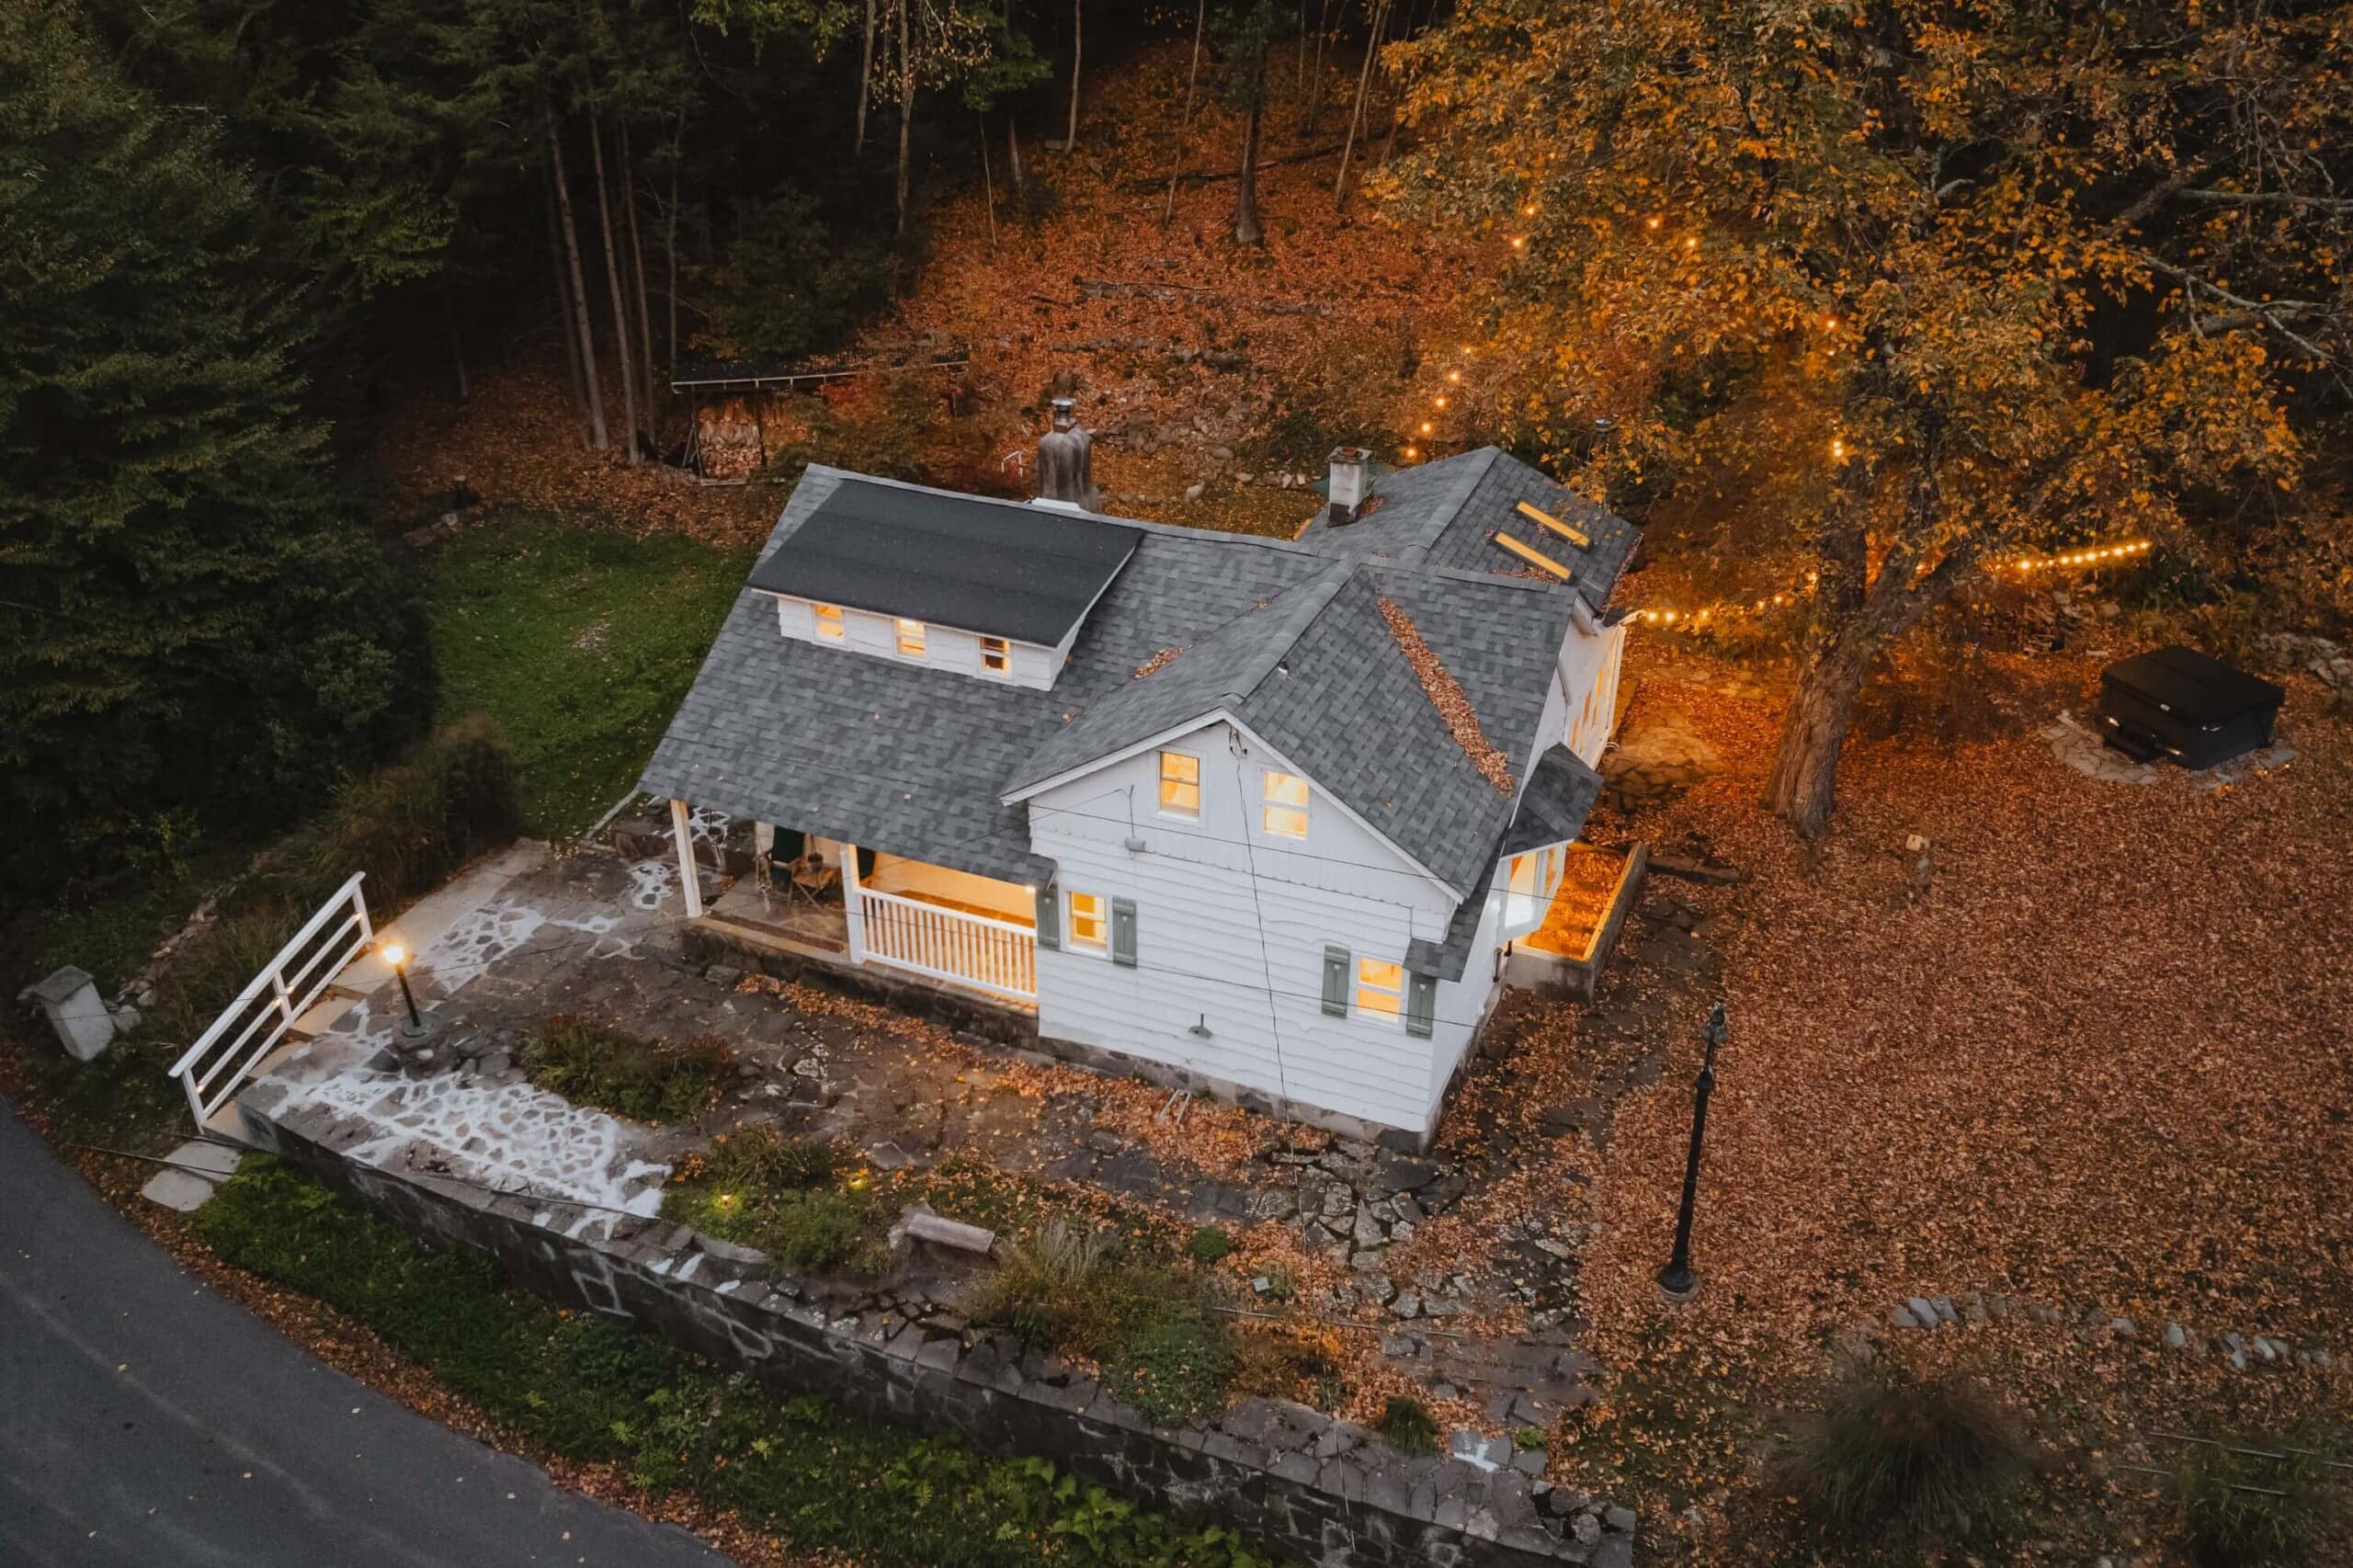 Aerial view of a picturesque house in autumn with a cozy fire pit and a solitary figure enjoying the tranquil evening.